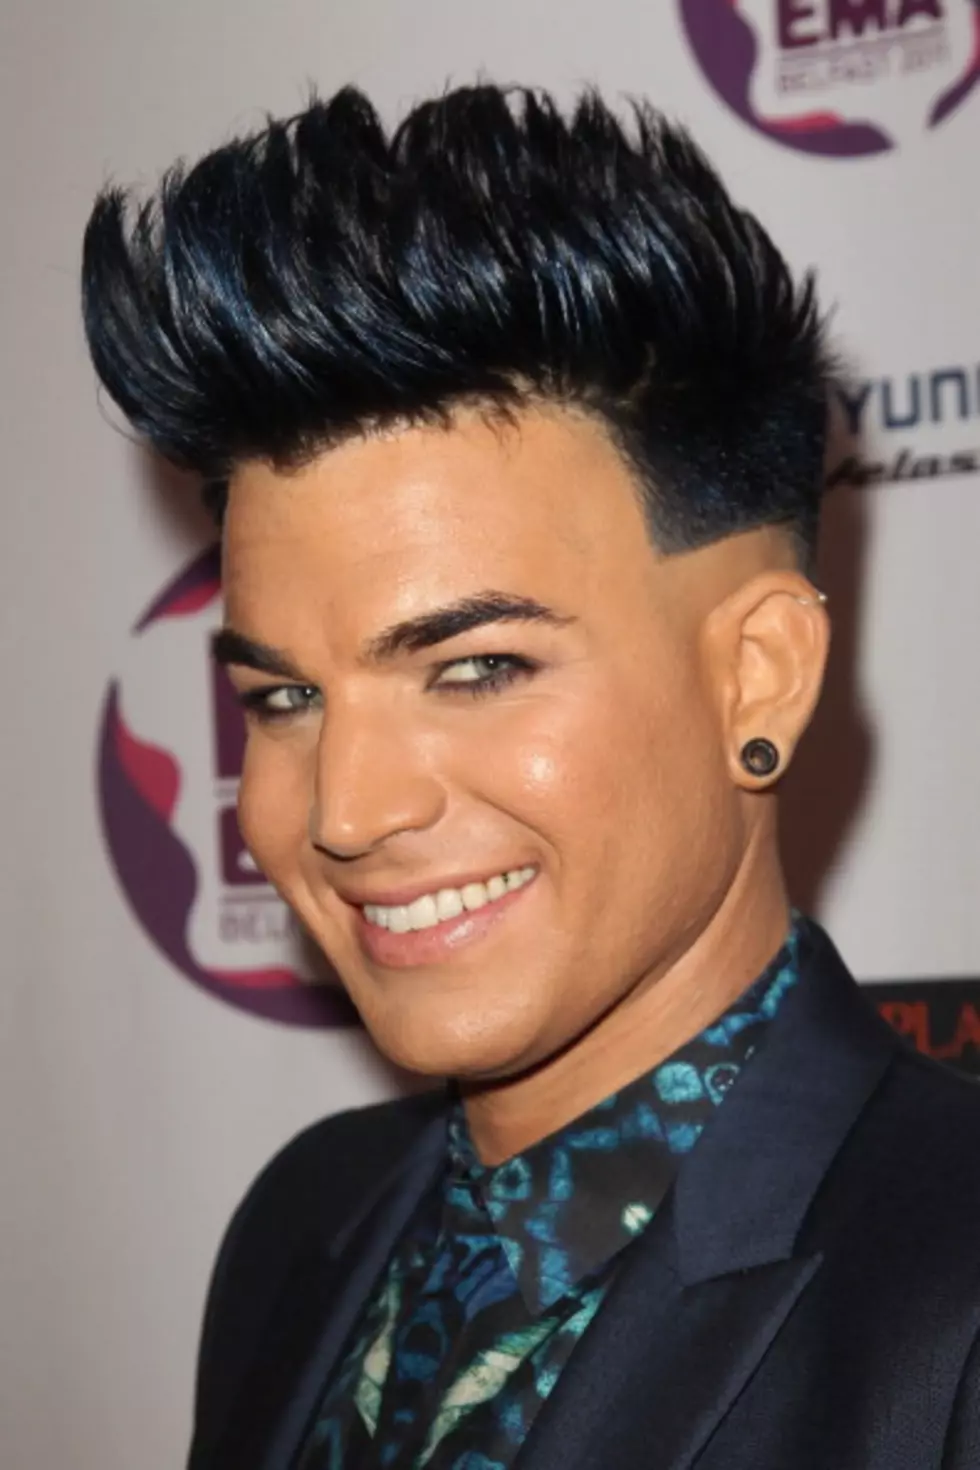 Adam Lambert As Queen’s New Lead? 5 Combos That Could Be Worse [PHOTOS/AUDIO]